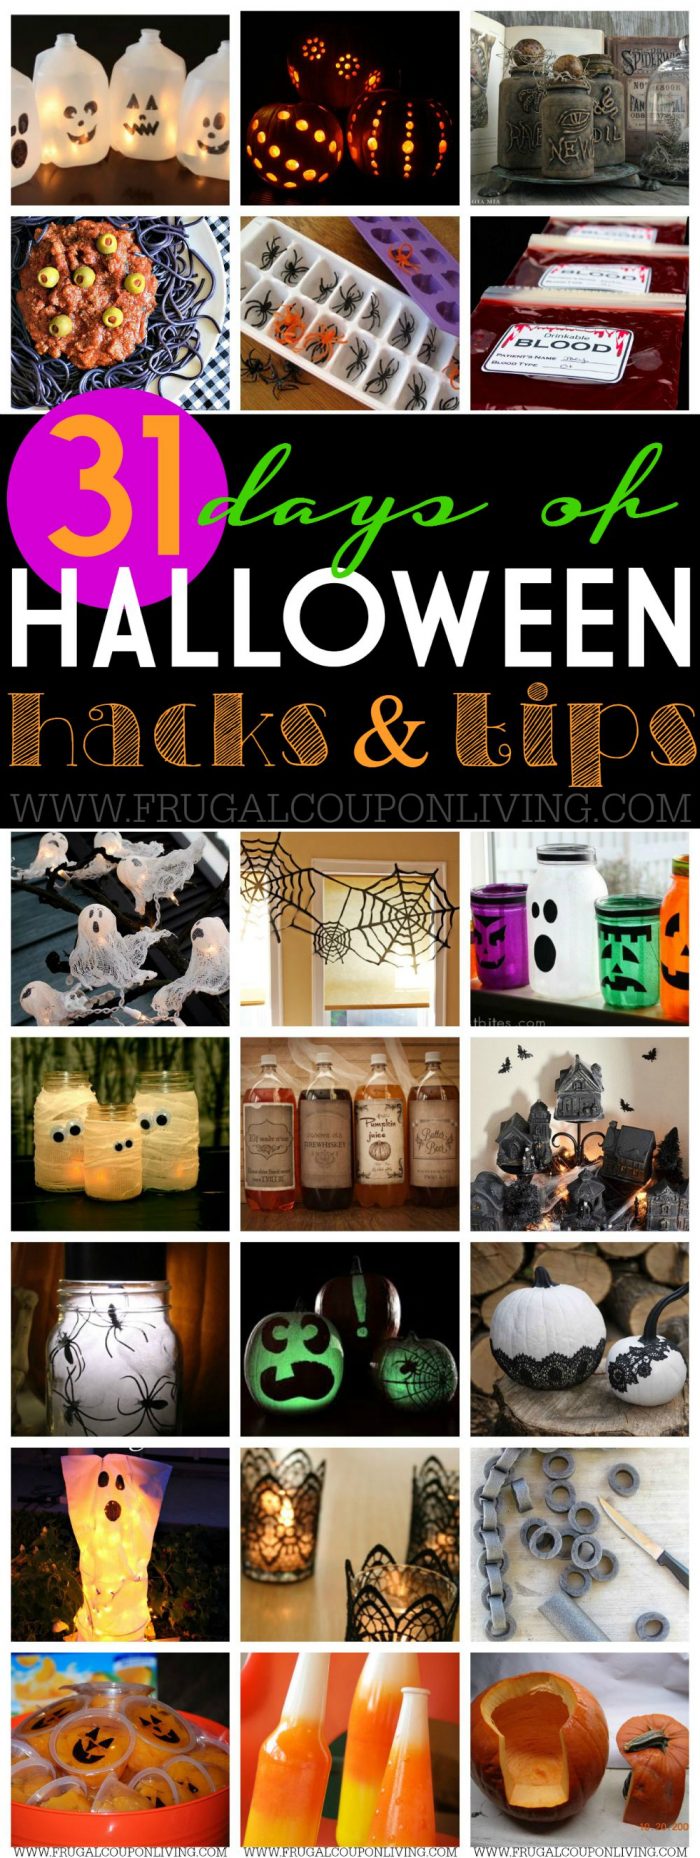 Halloween-hacks-and-tips-Collage-frugal-coupon-living-1000